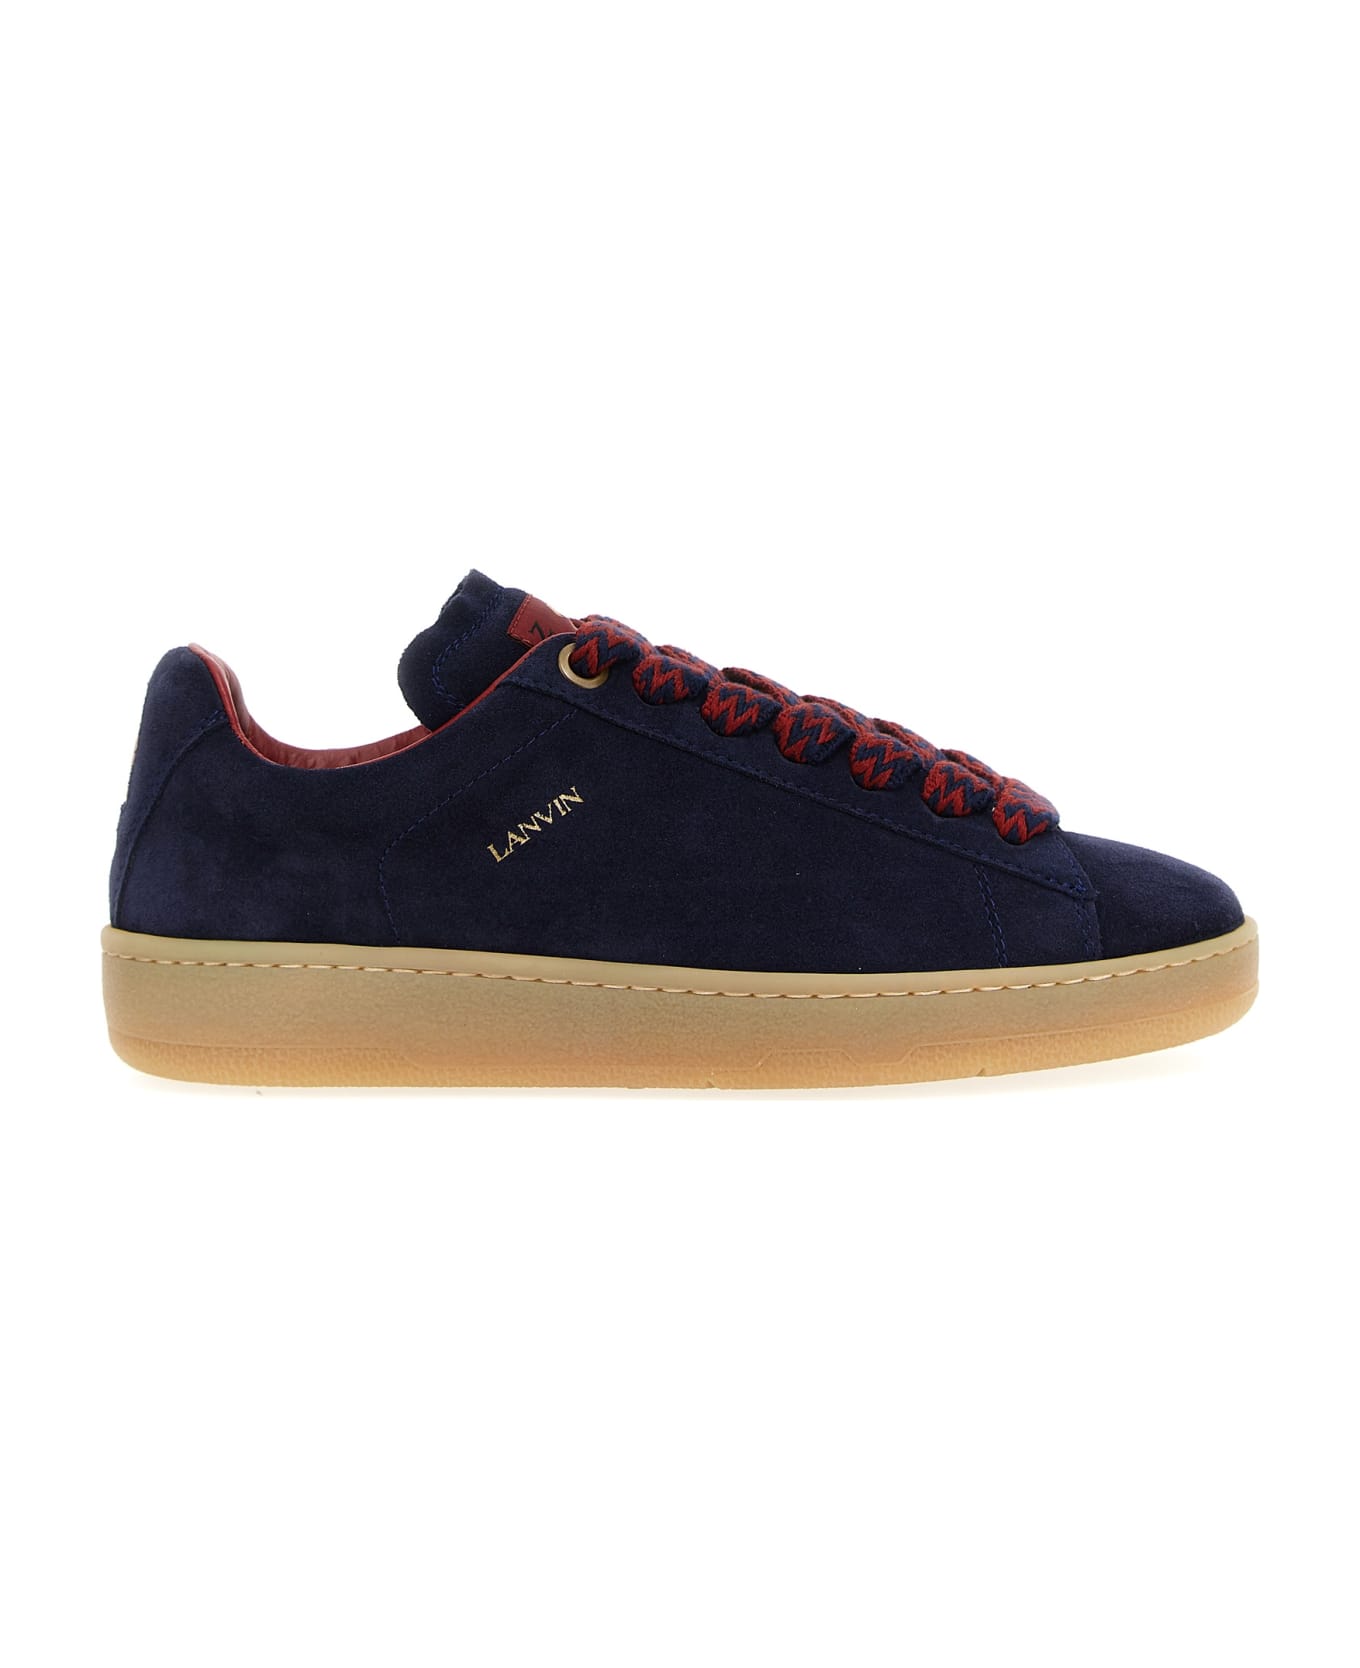 Lanvin 'lite Curb' Sneakers - Navy Blue/red